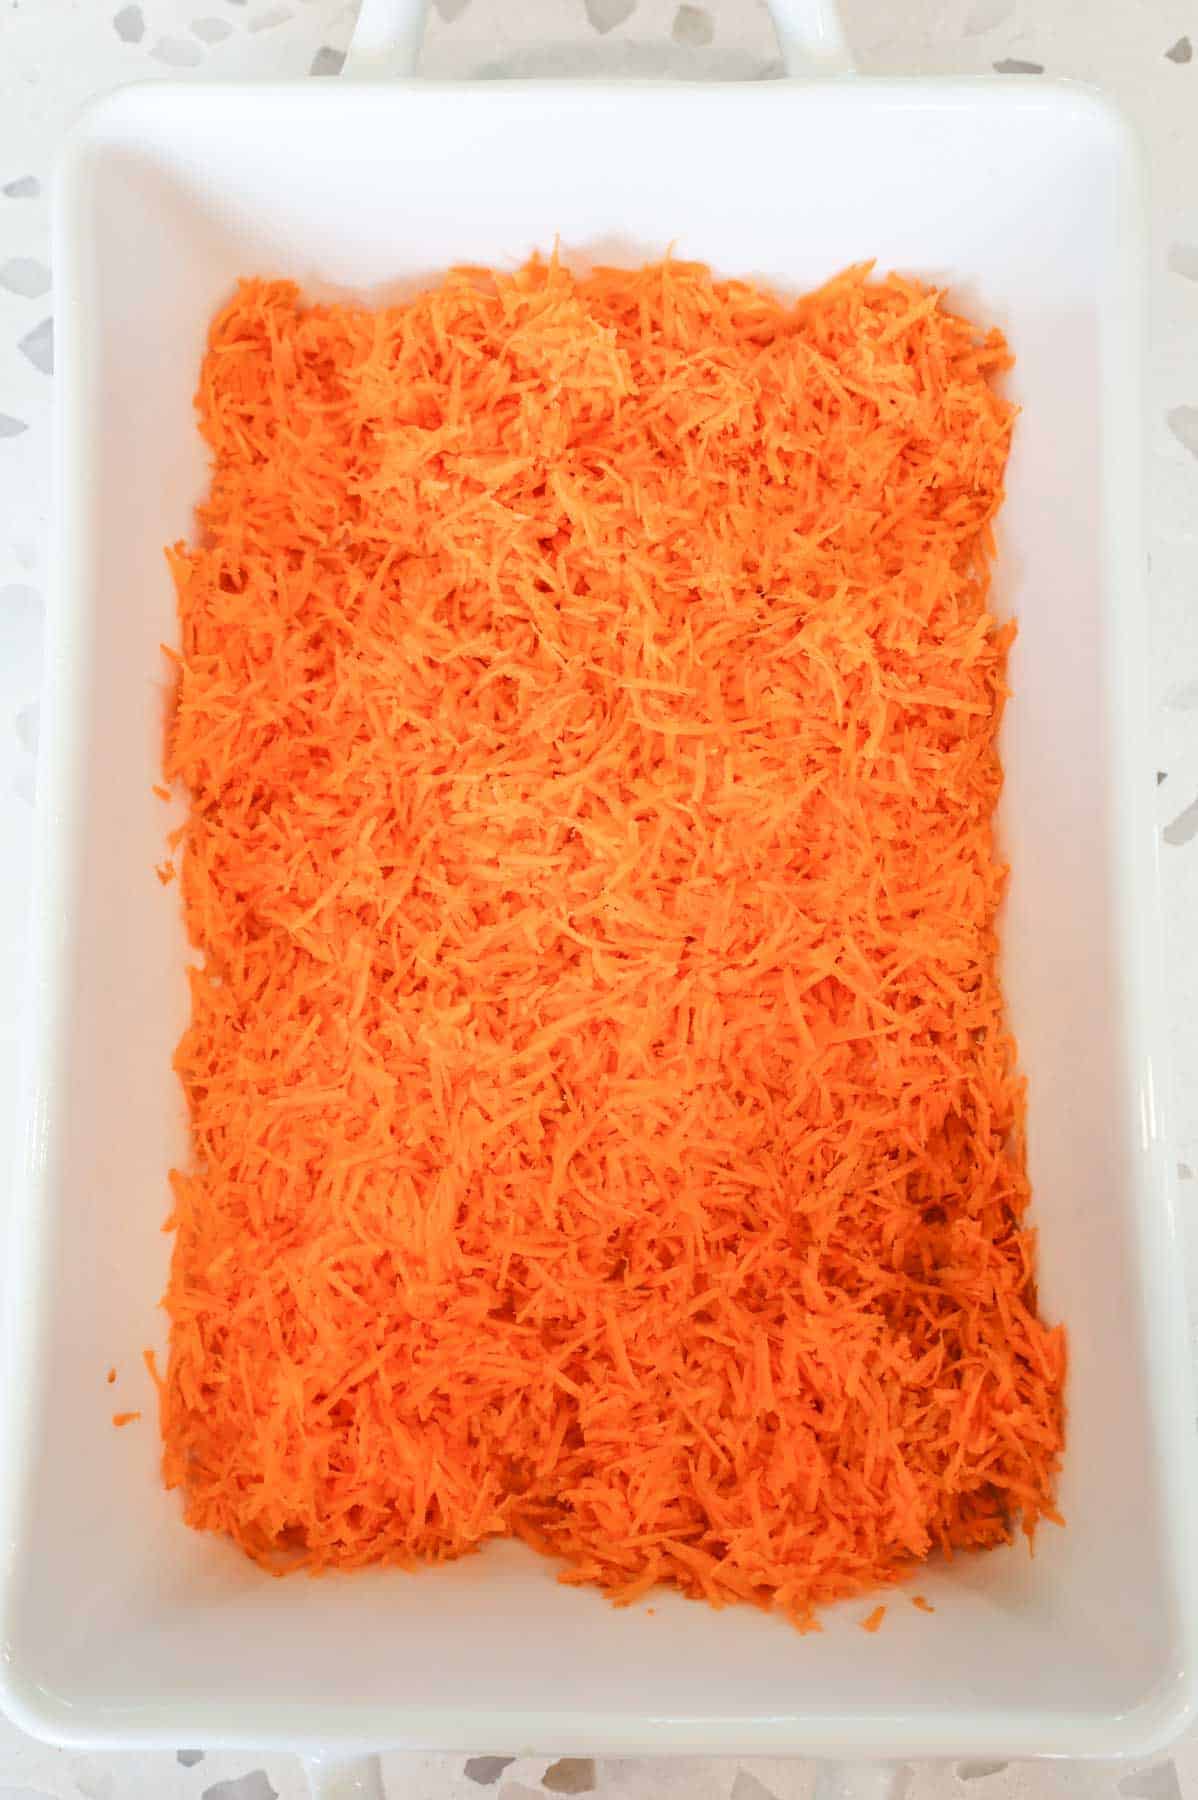 grated carrot in the bottom of a baking dish